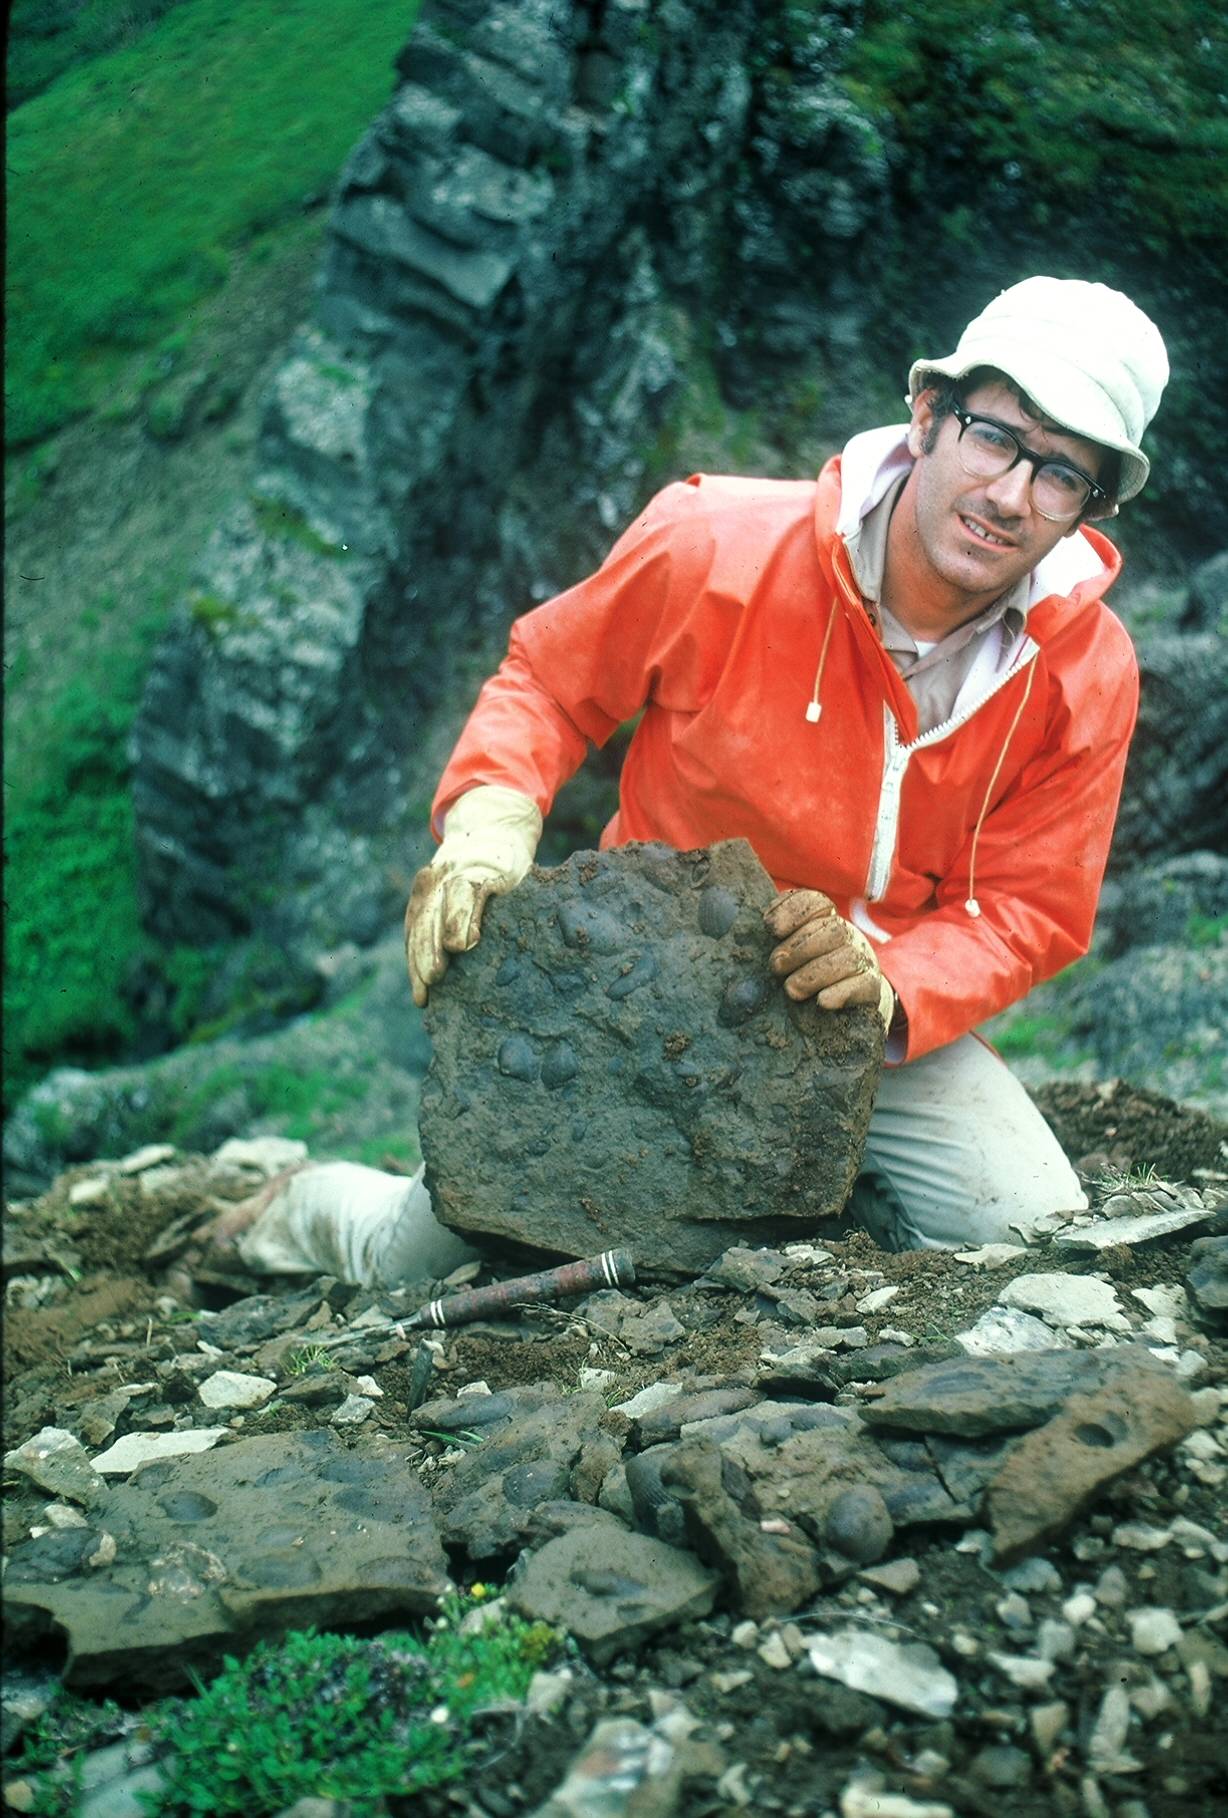 A slab of sandstone with 10-million-year-old shells; tired at the end of a long day at Cape Tachilni, by Cold Bay, Alaska, 1977. Photo courtesy of Lou Marincovich.